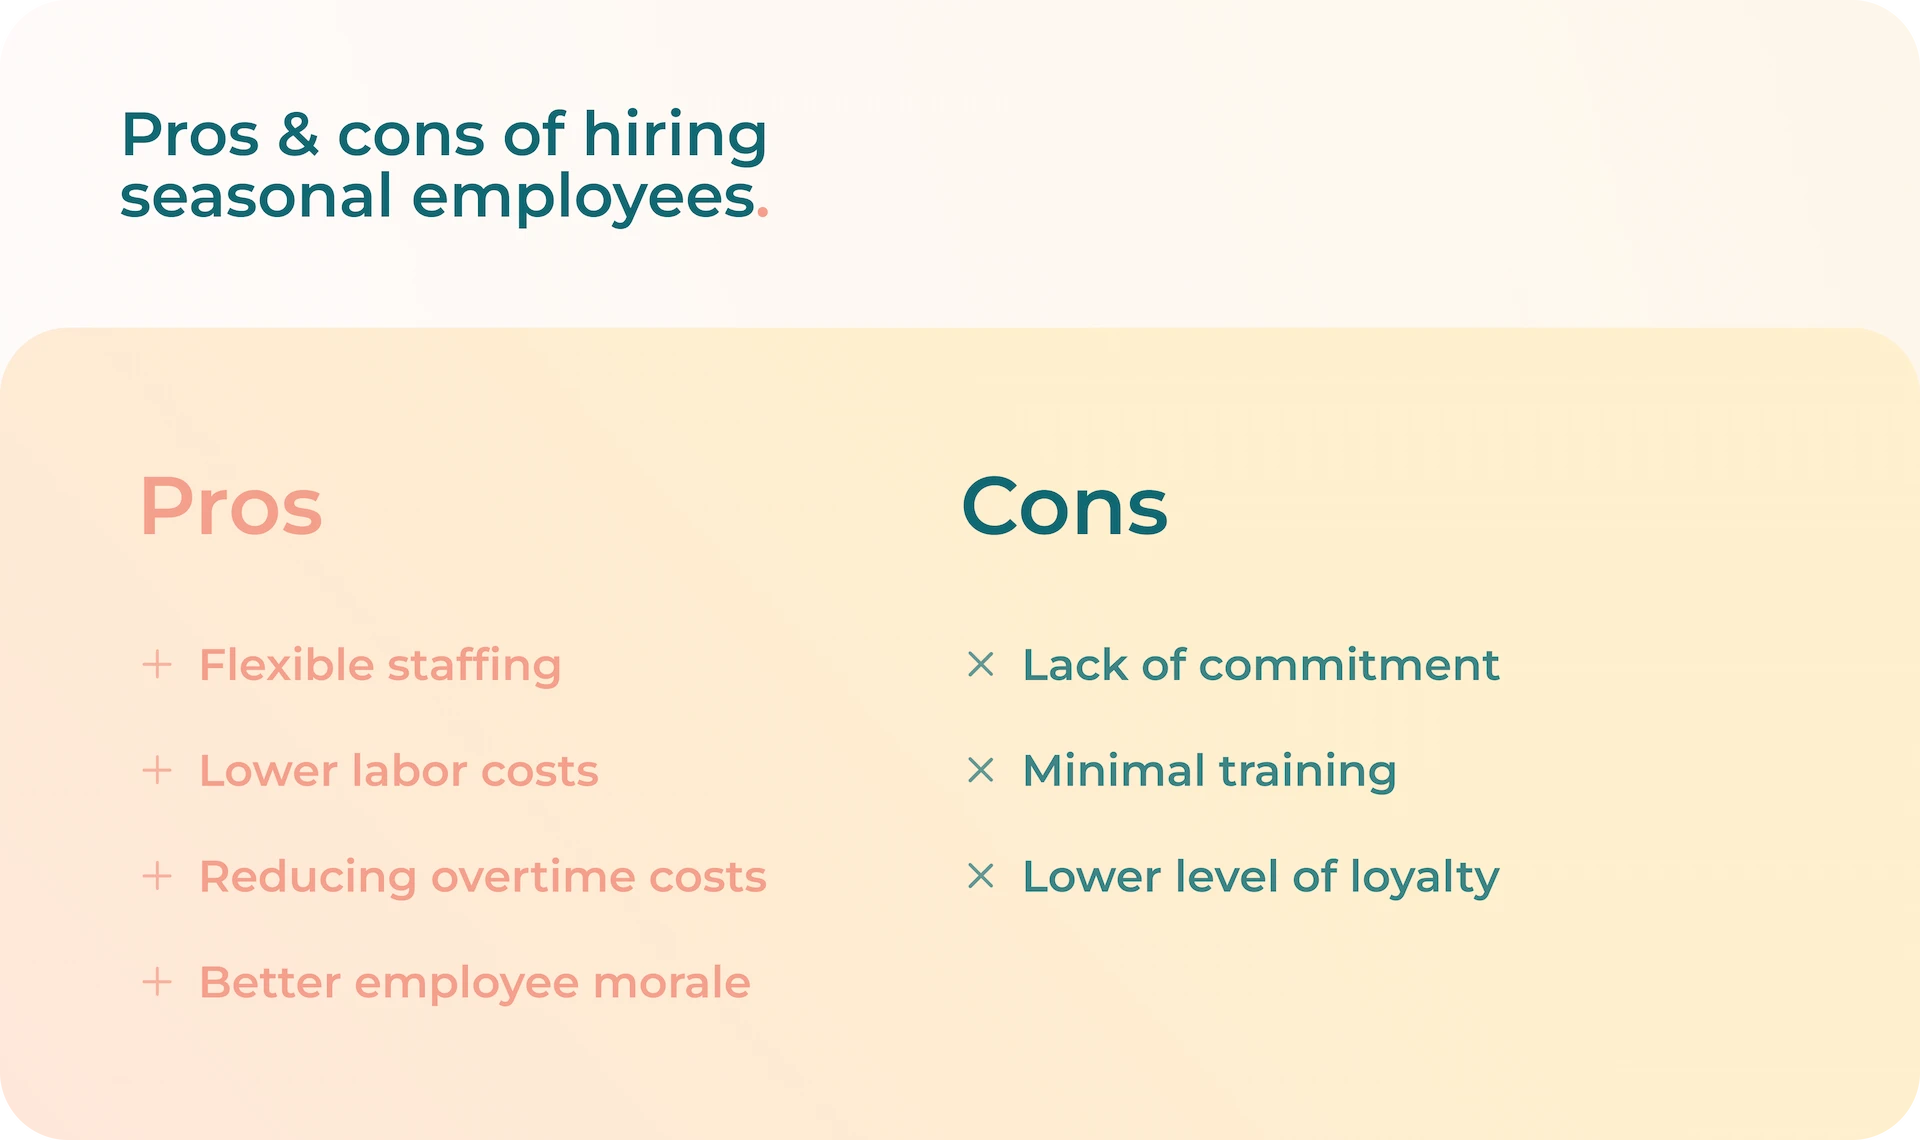 List of pros and cons to hire seasonal employees